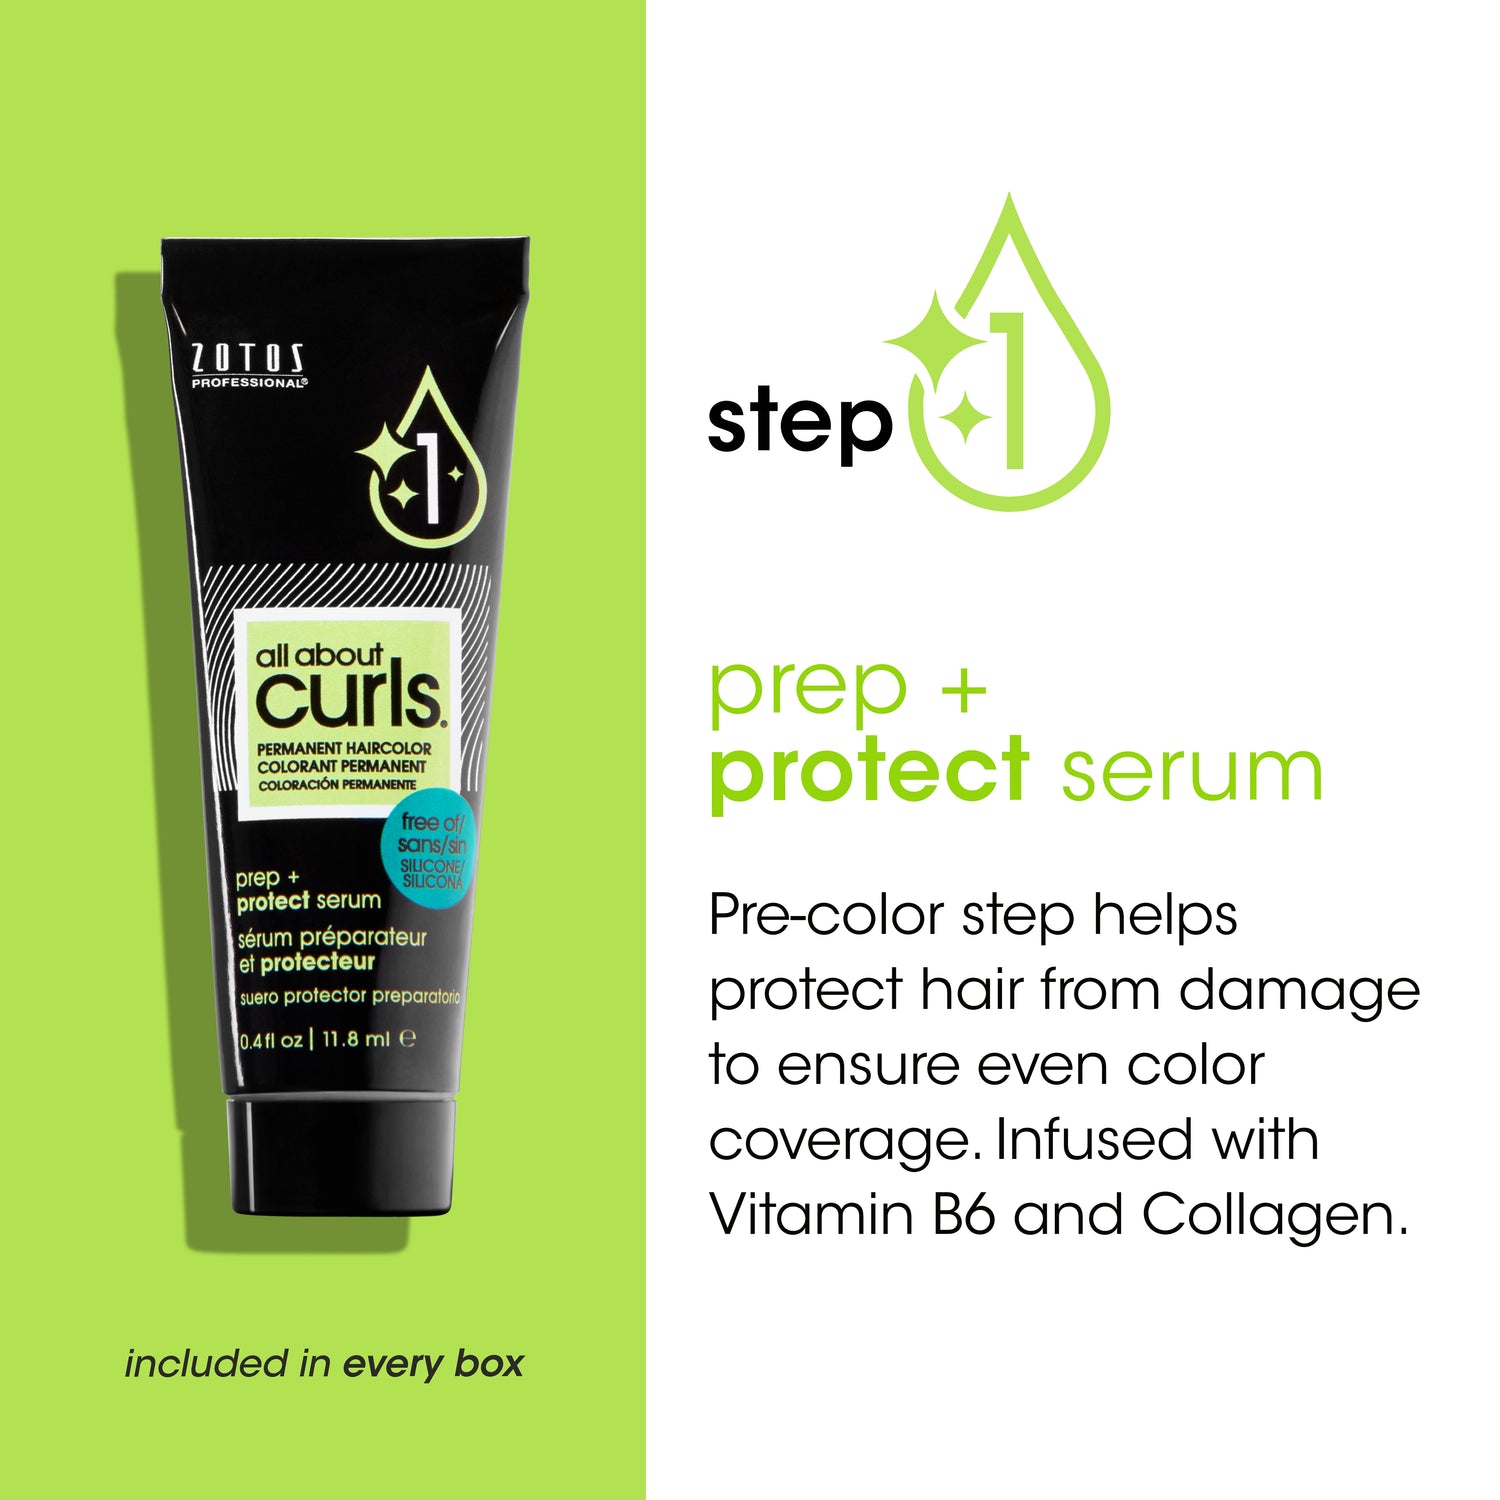 Step 1: Prep and protect serum (included in every box). Pre-color step helps protect hair from damage to ensure even color coverage. Infused with Vitamin B6 and Collagen.